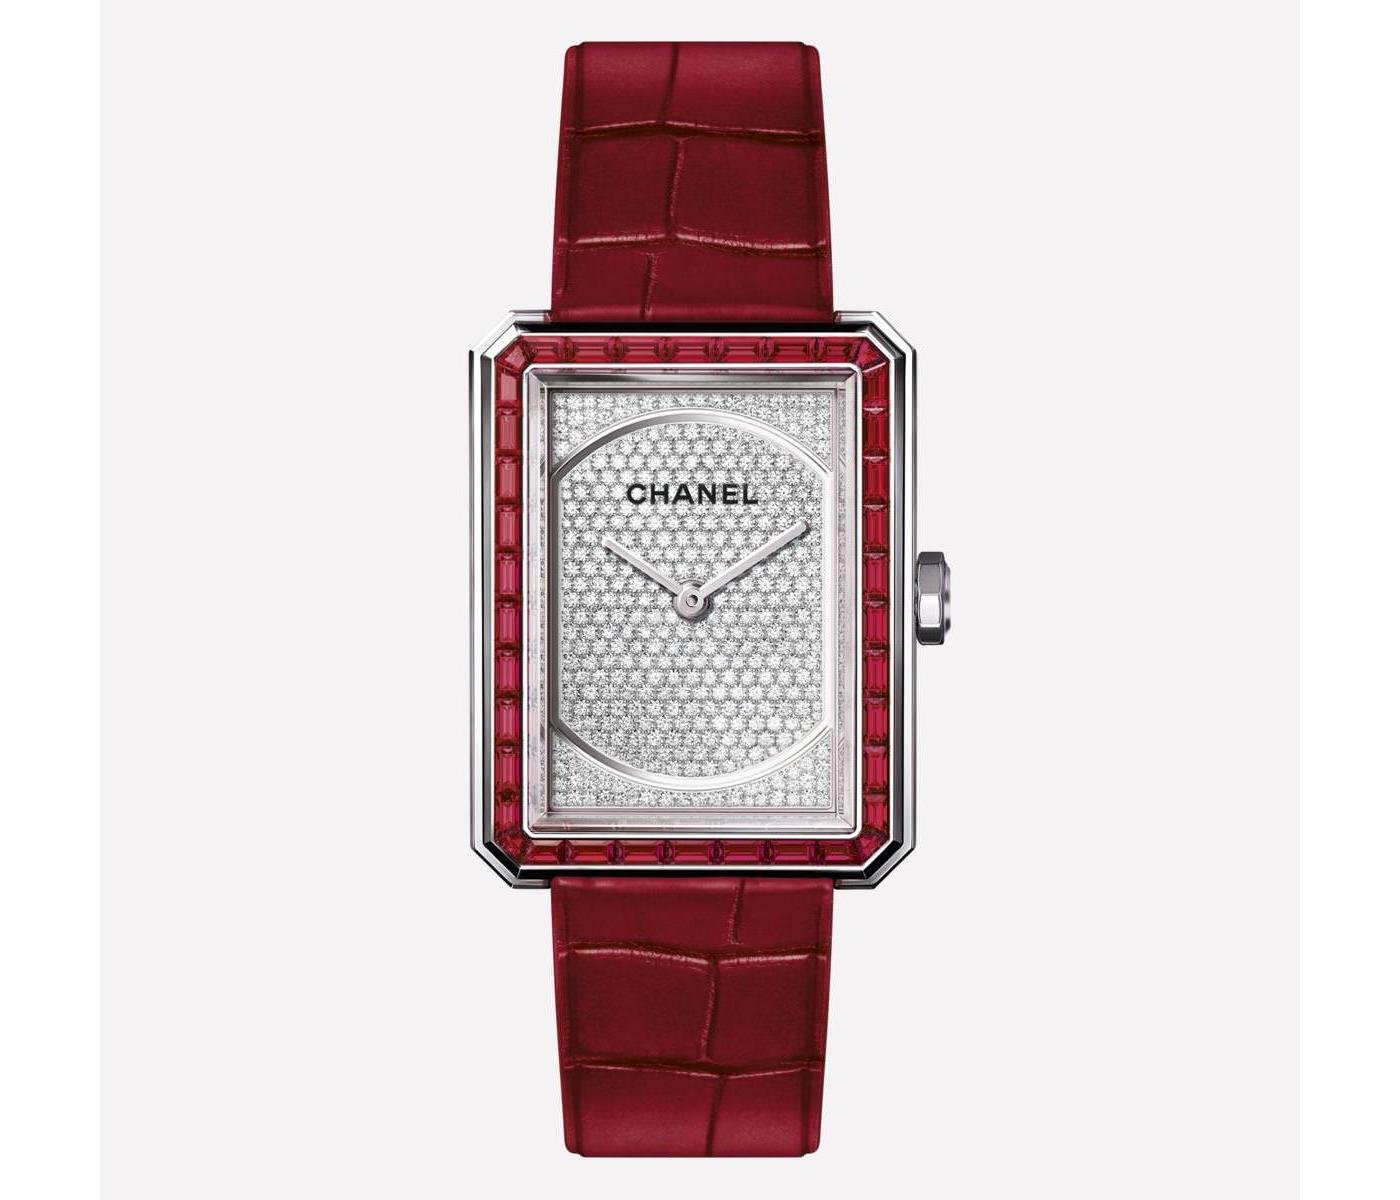 Watch by Chanel